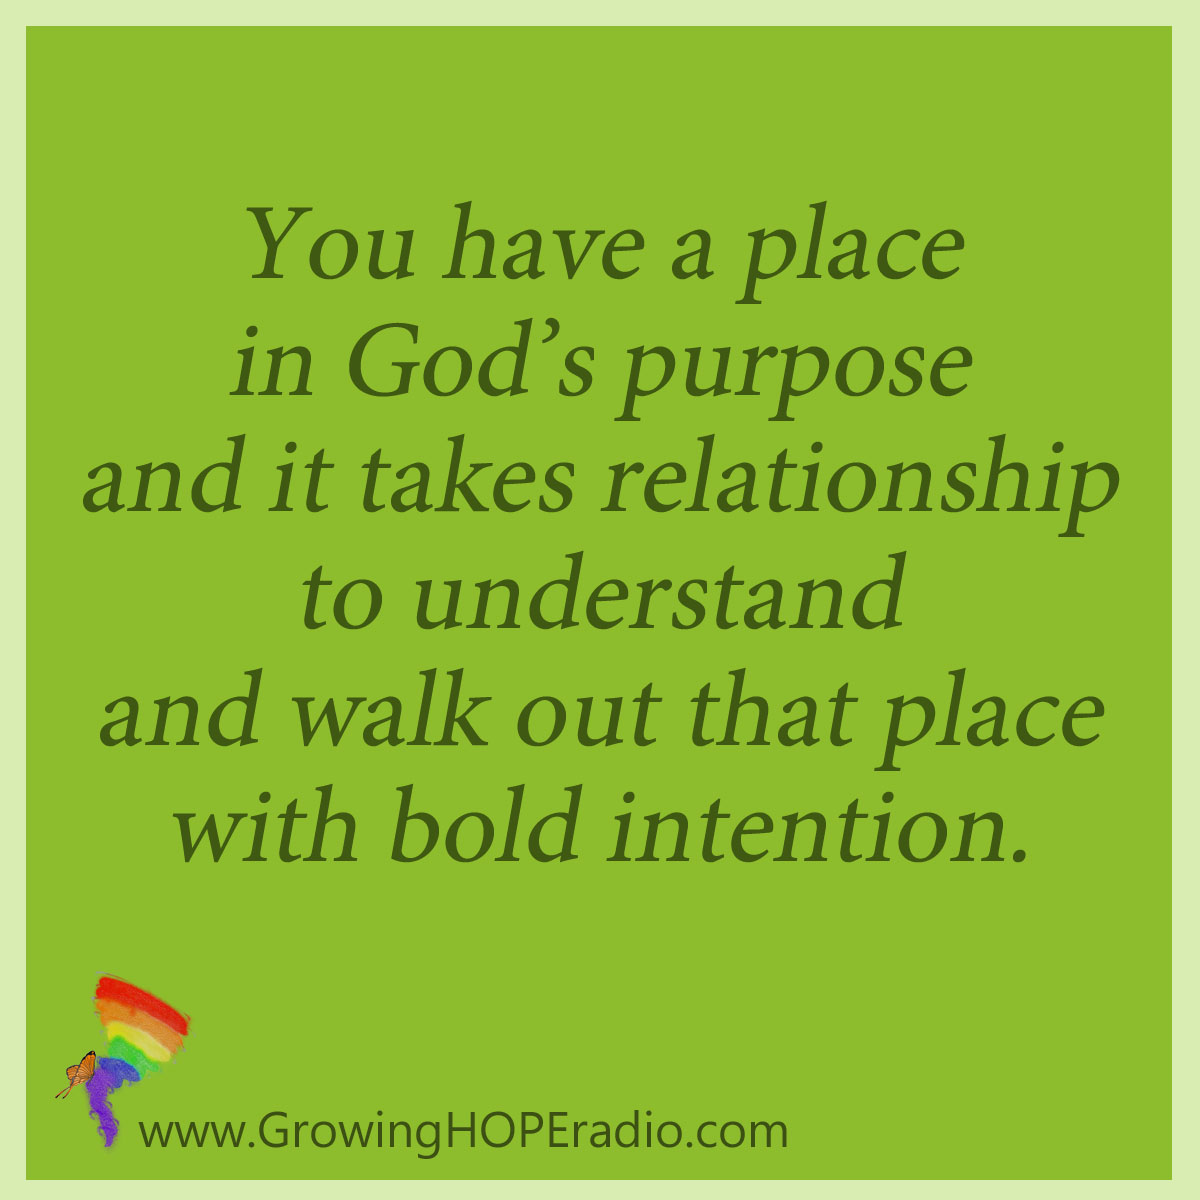 Growing HOPE Daily quote - purpose takes relationships